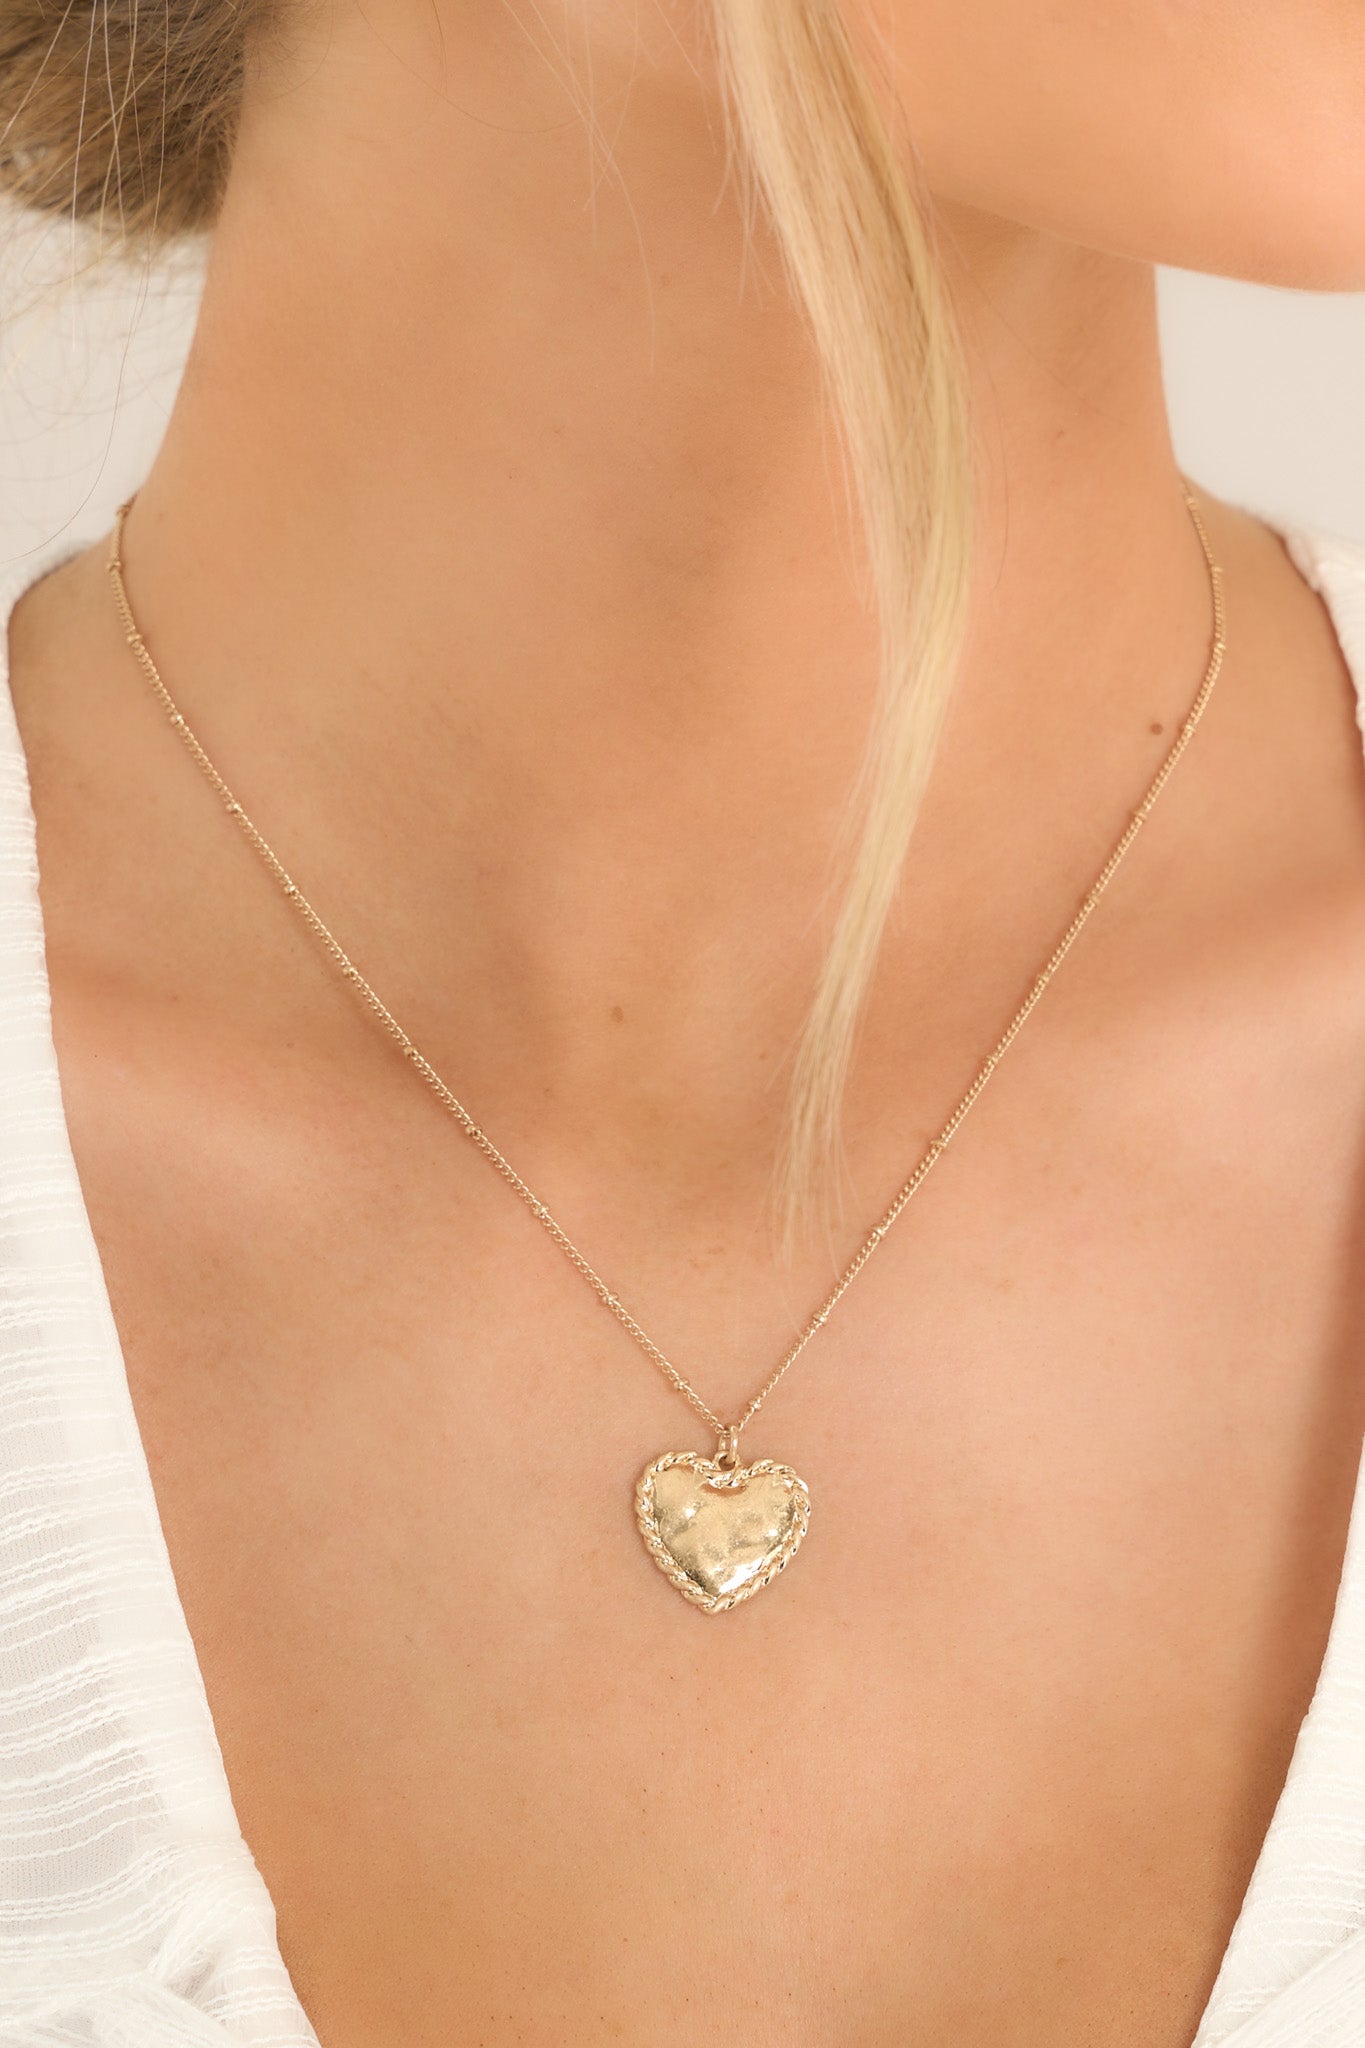 Close up view of this necklace that features gold hardware, a heart shaped pendant, and a lobster clasp closures with a 3